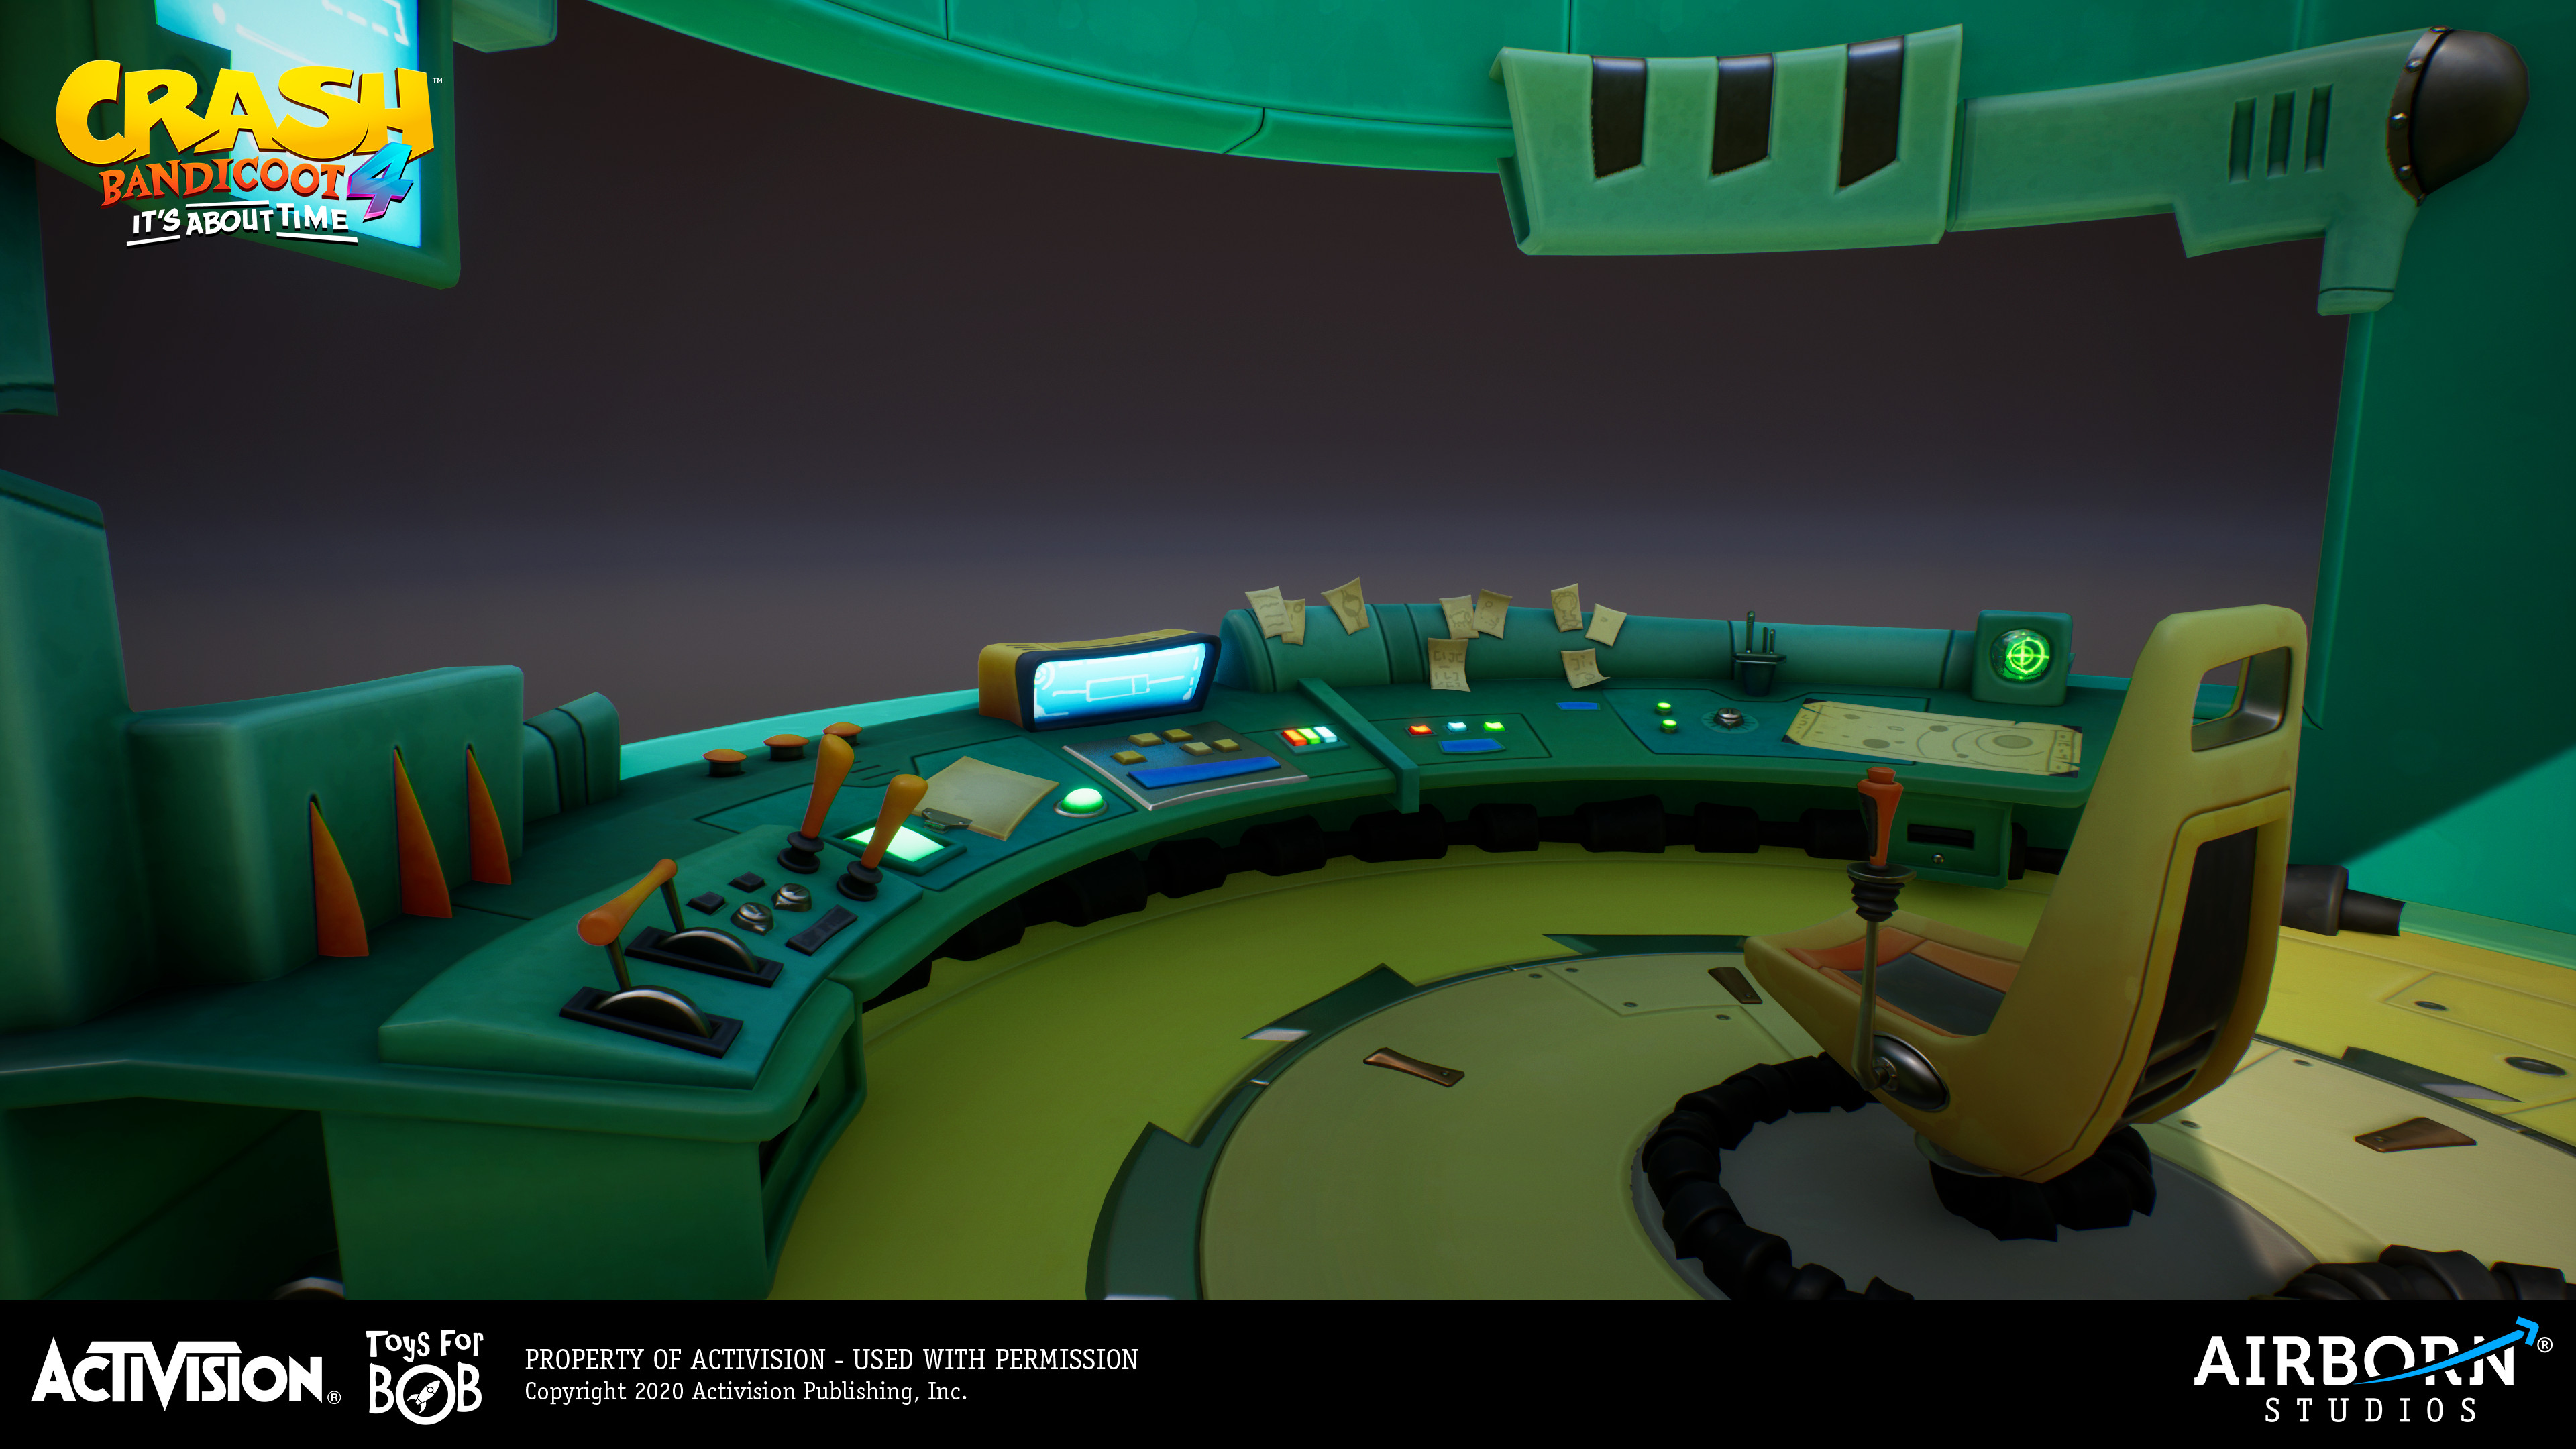 Neo Cortex Control Room - 3D work done by Frederic Fouque; support by Benjamin Sauer and Manuel Virks (lighting)